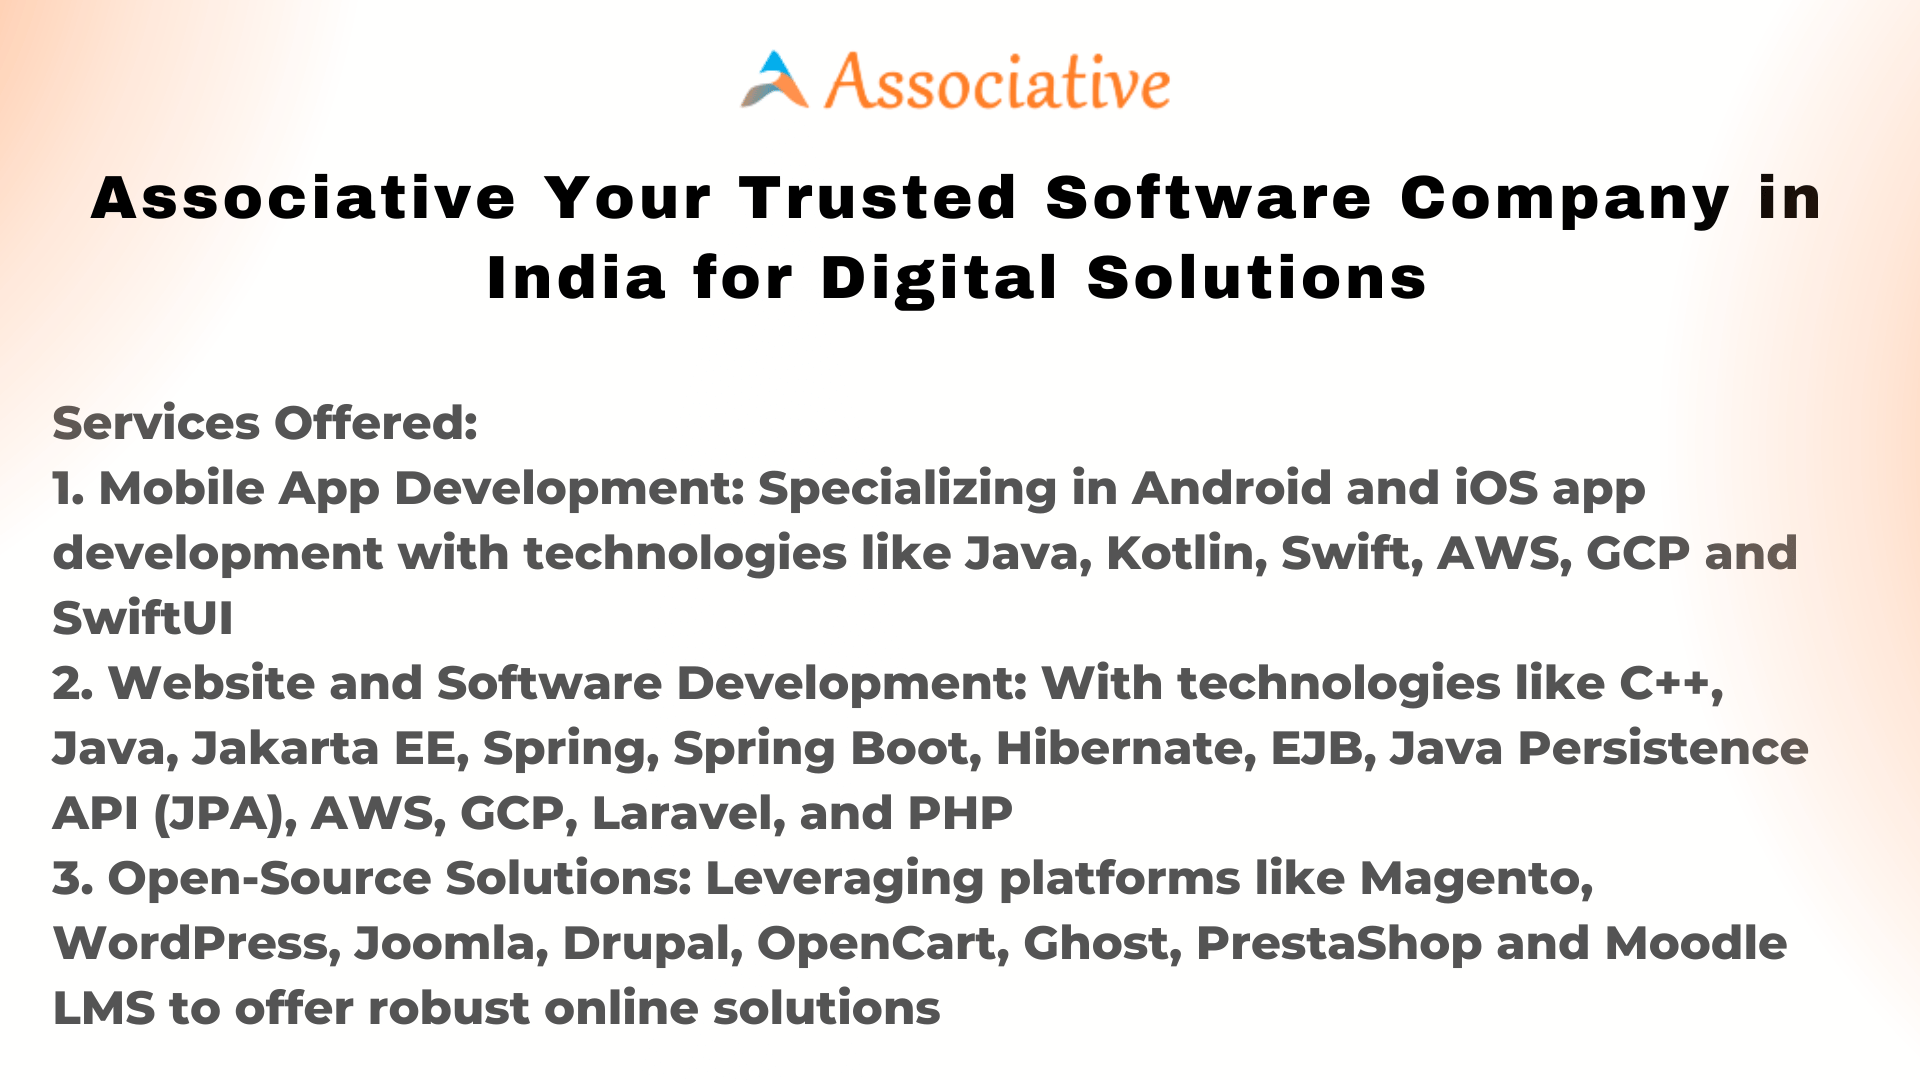 Associative Your Trusted Software Company in India for Digital Solutions